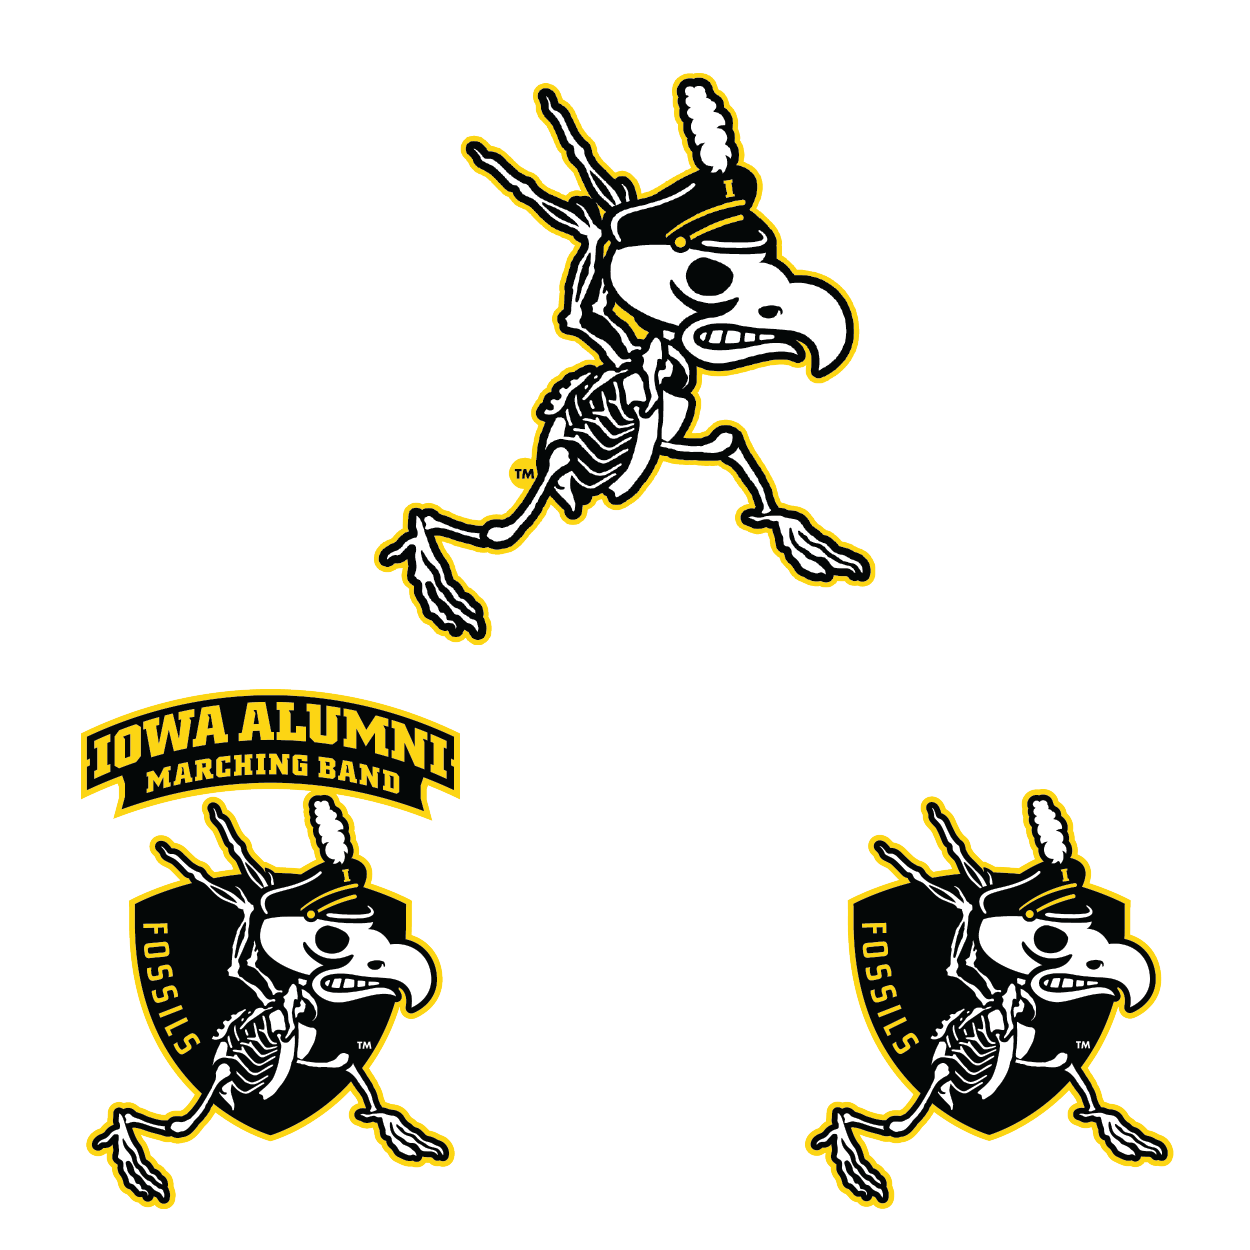 Examples of new Skeleton Herky Fossil Band logos